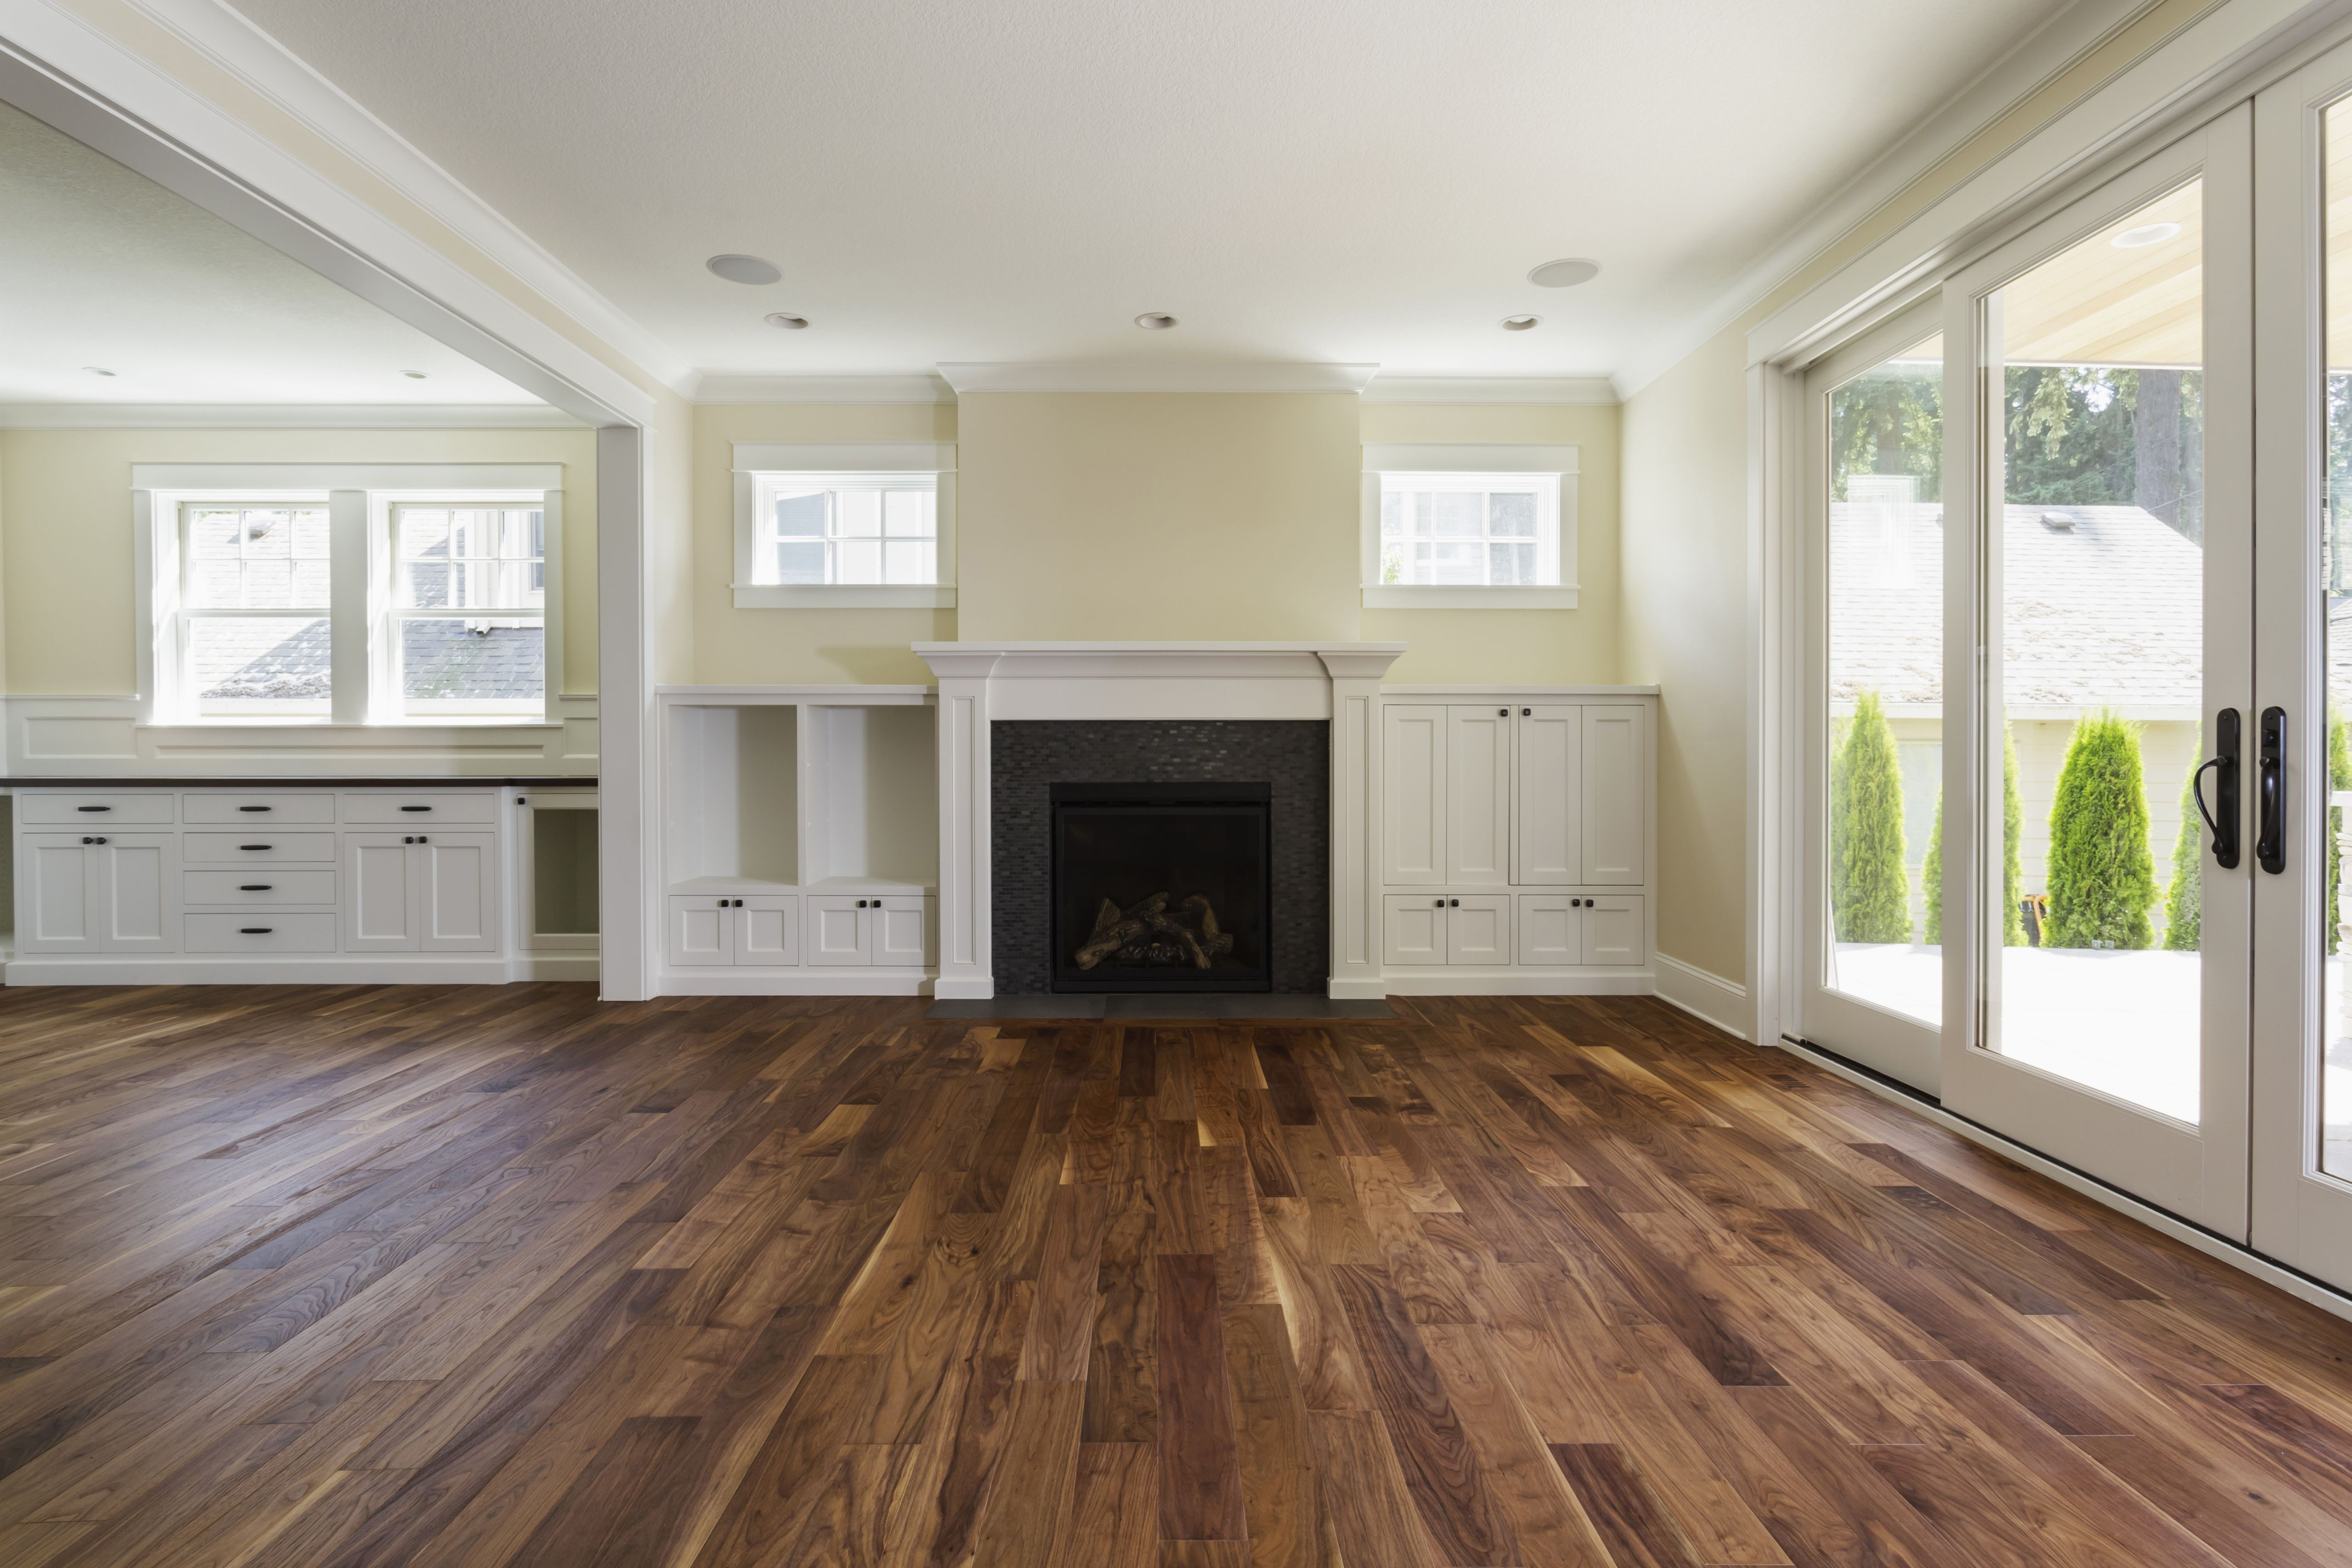 26 Stylish 5 Hickory Hardwood Flooring 2024 free download 5 hickory hardwood flooring of the pros and cons of prefinished hardwood flooring for fireplace and built in shelves in living room 482143011 57bef8e33df78cc16e035397